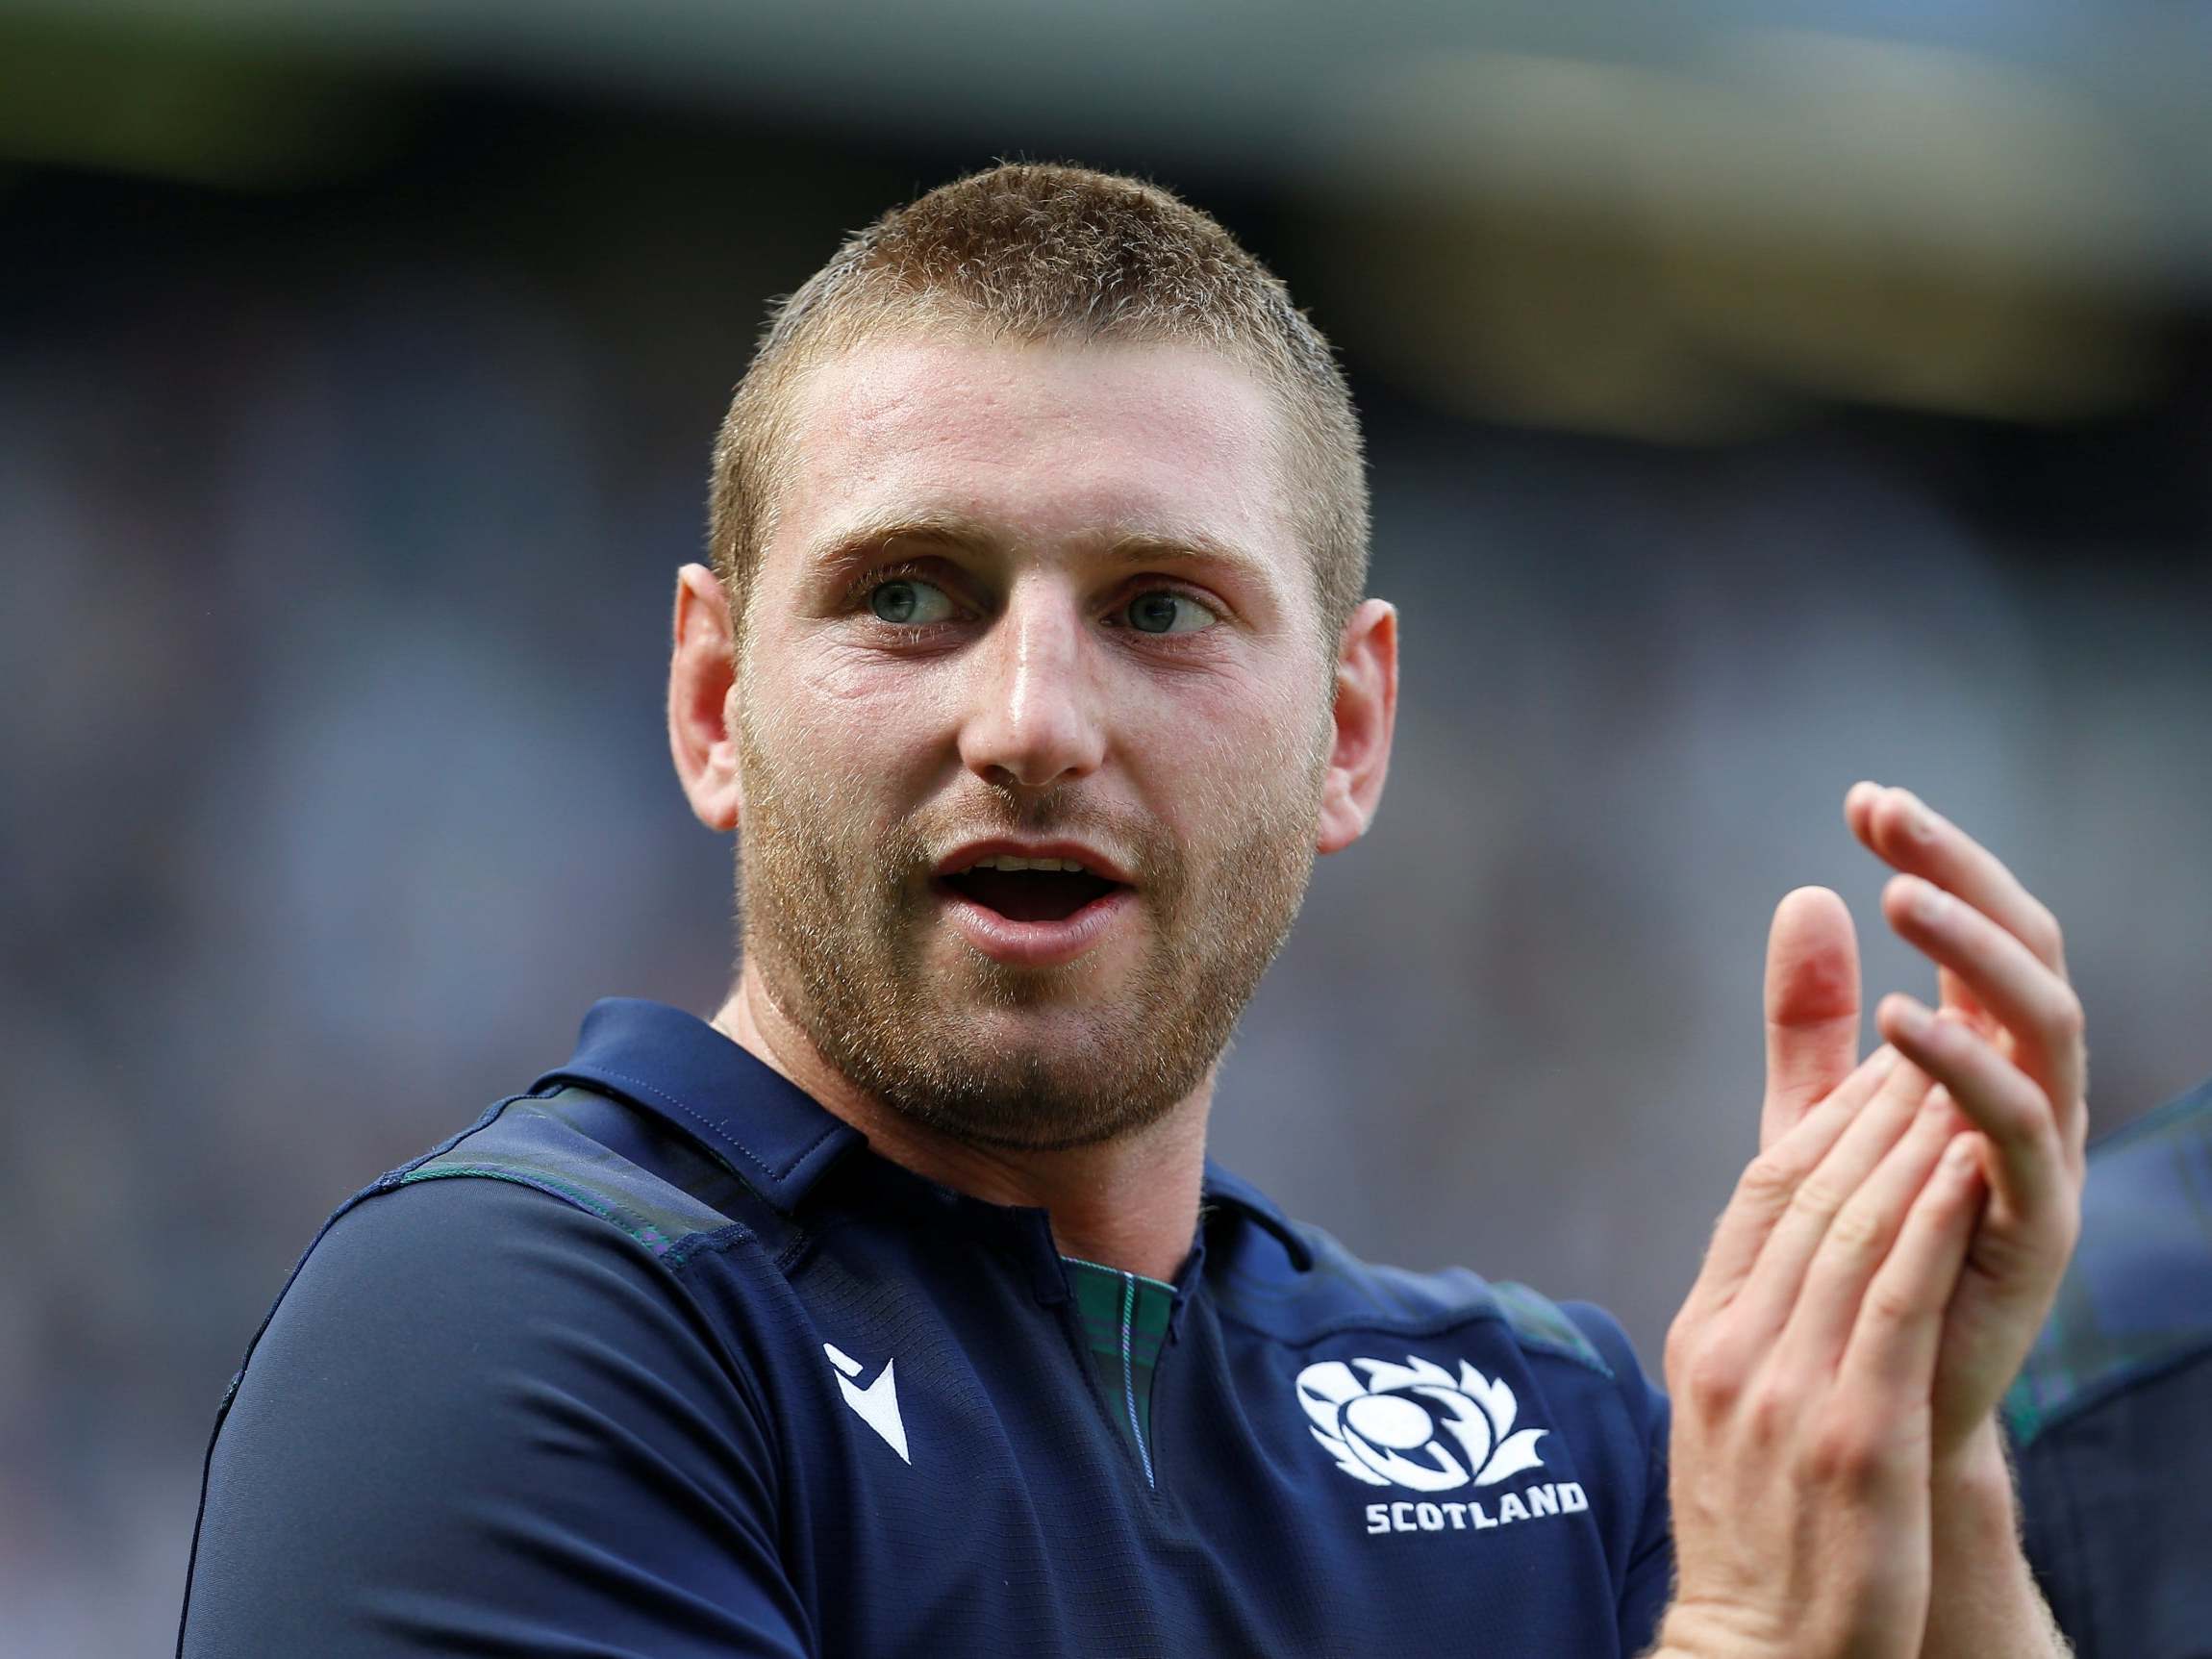 Georgia vs Scotland result: Finn Russell stars in tune up for Rugby World Cup with victory in Tbilisi